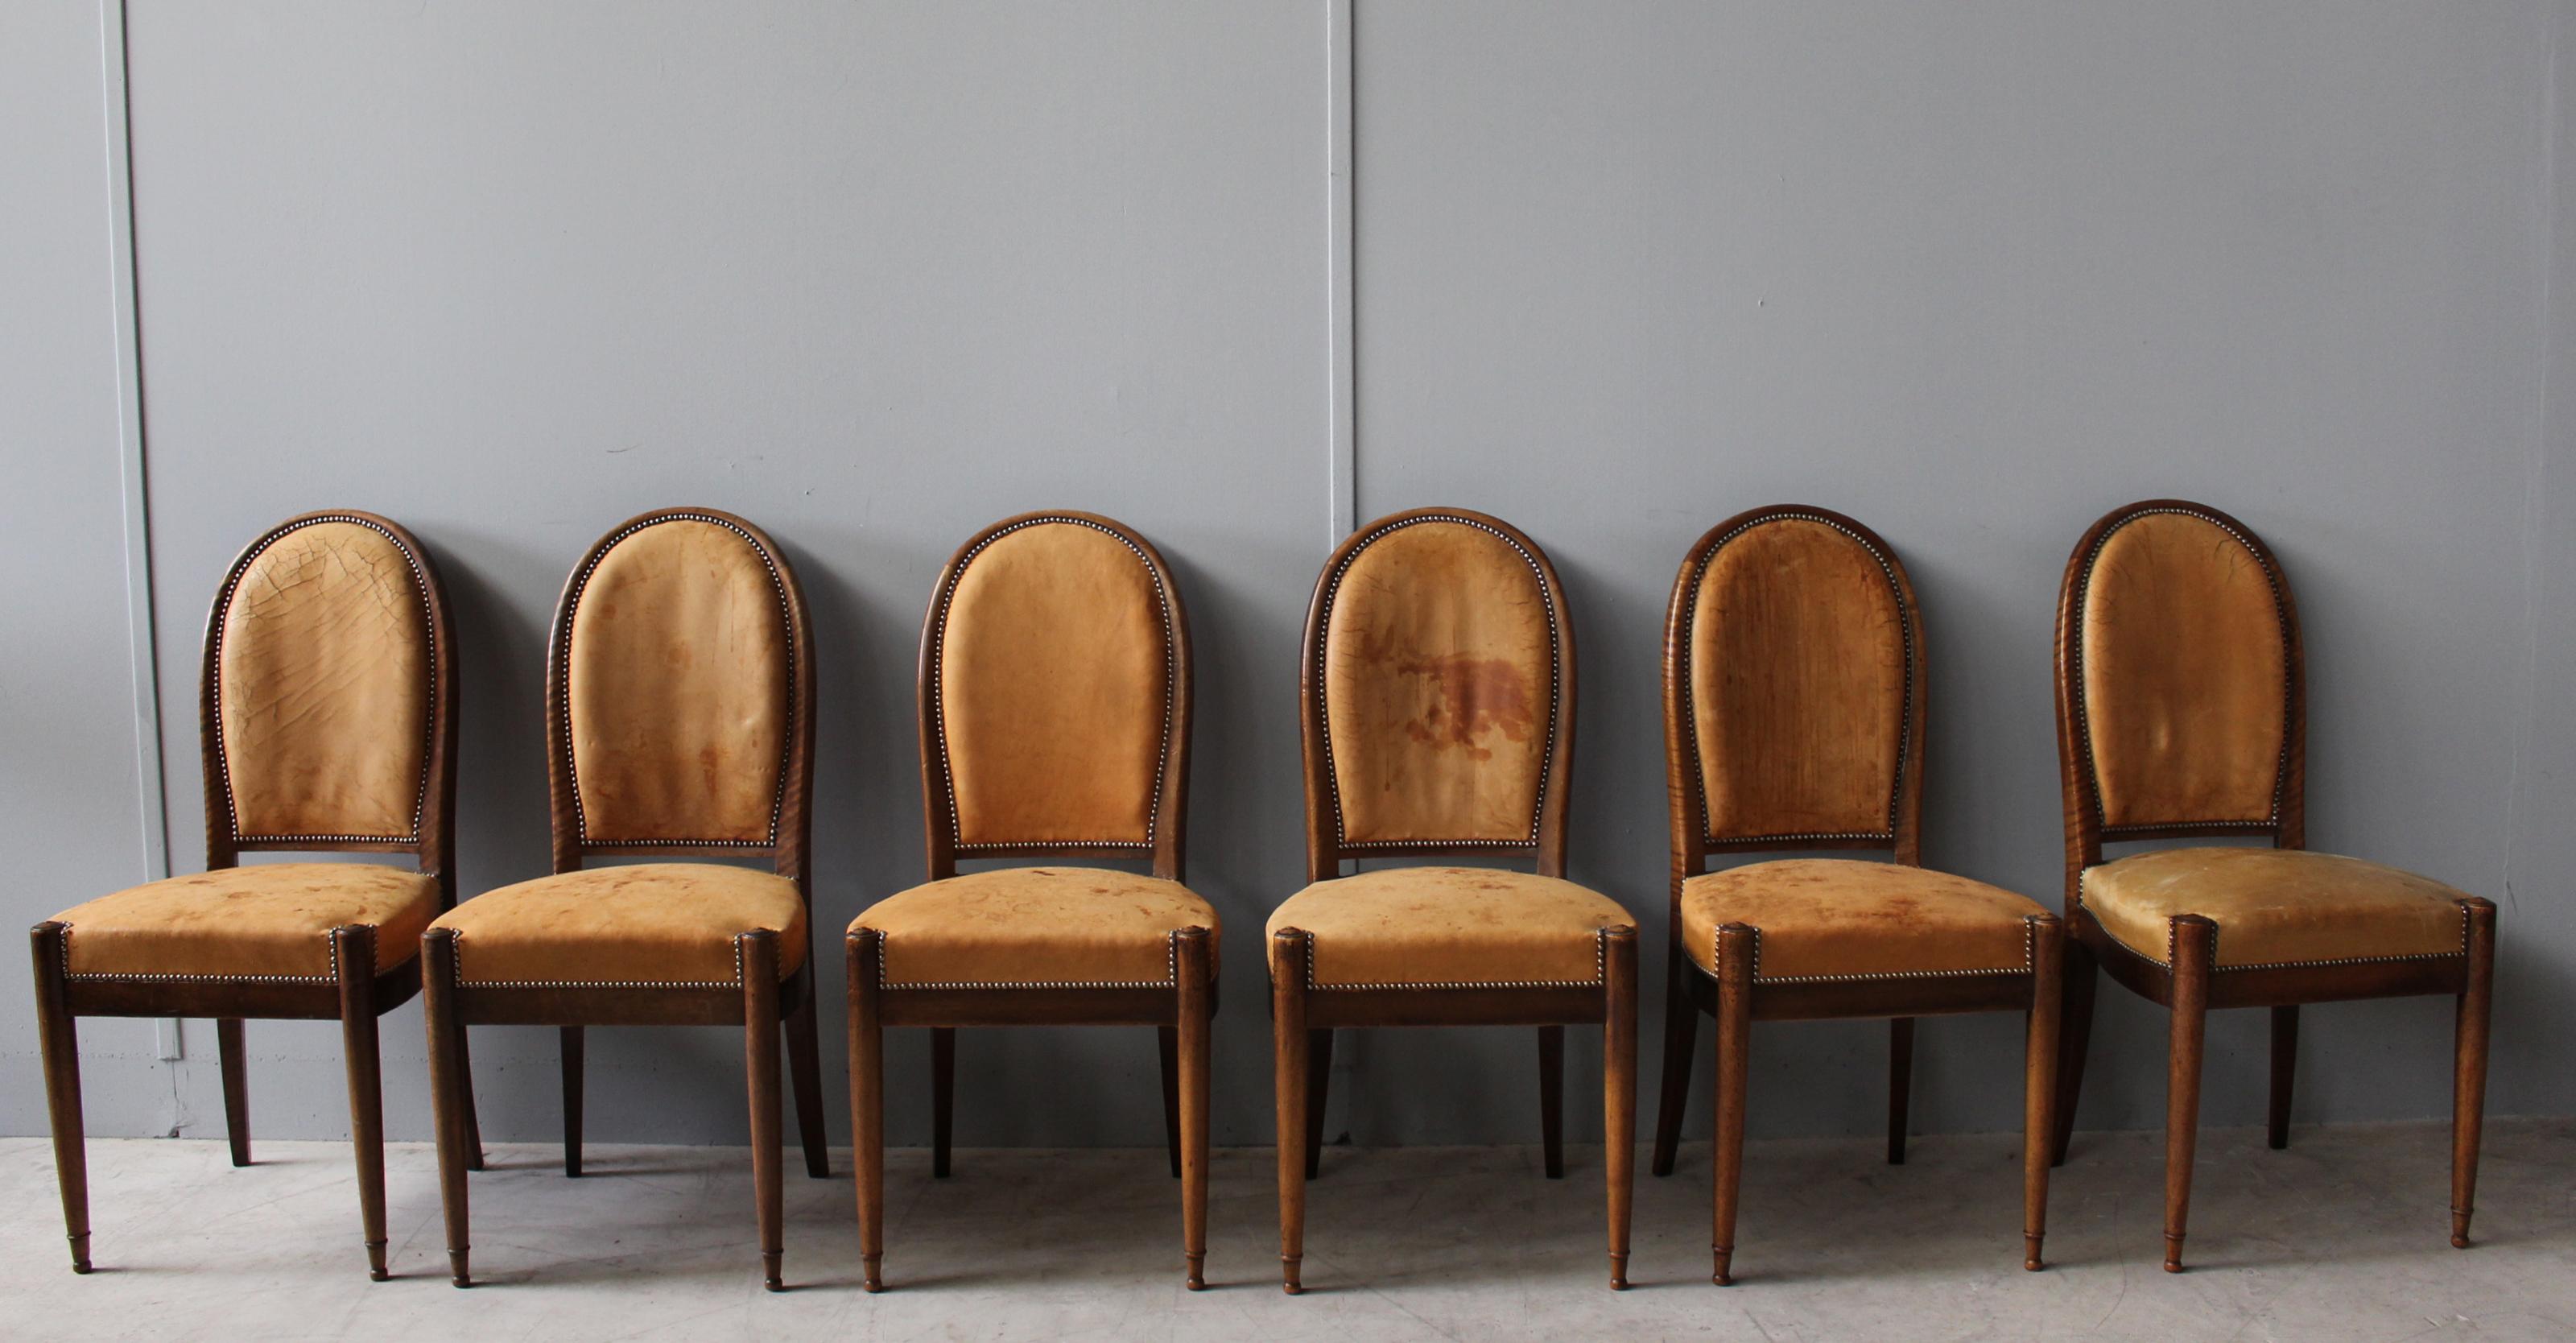 A set of six fine French Art Deco walnut dining / side chairs with an oval shape back and some exquisite carved wooden details, circa 1925.